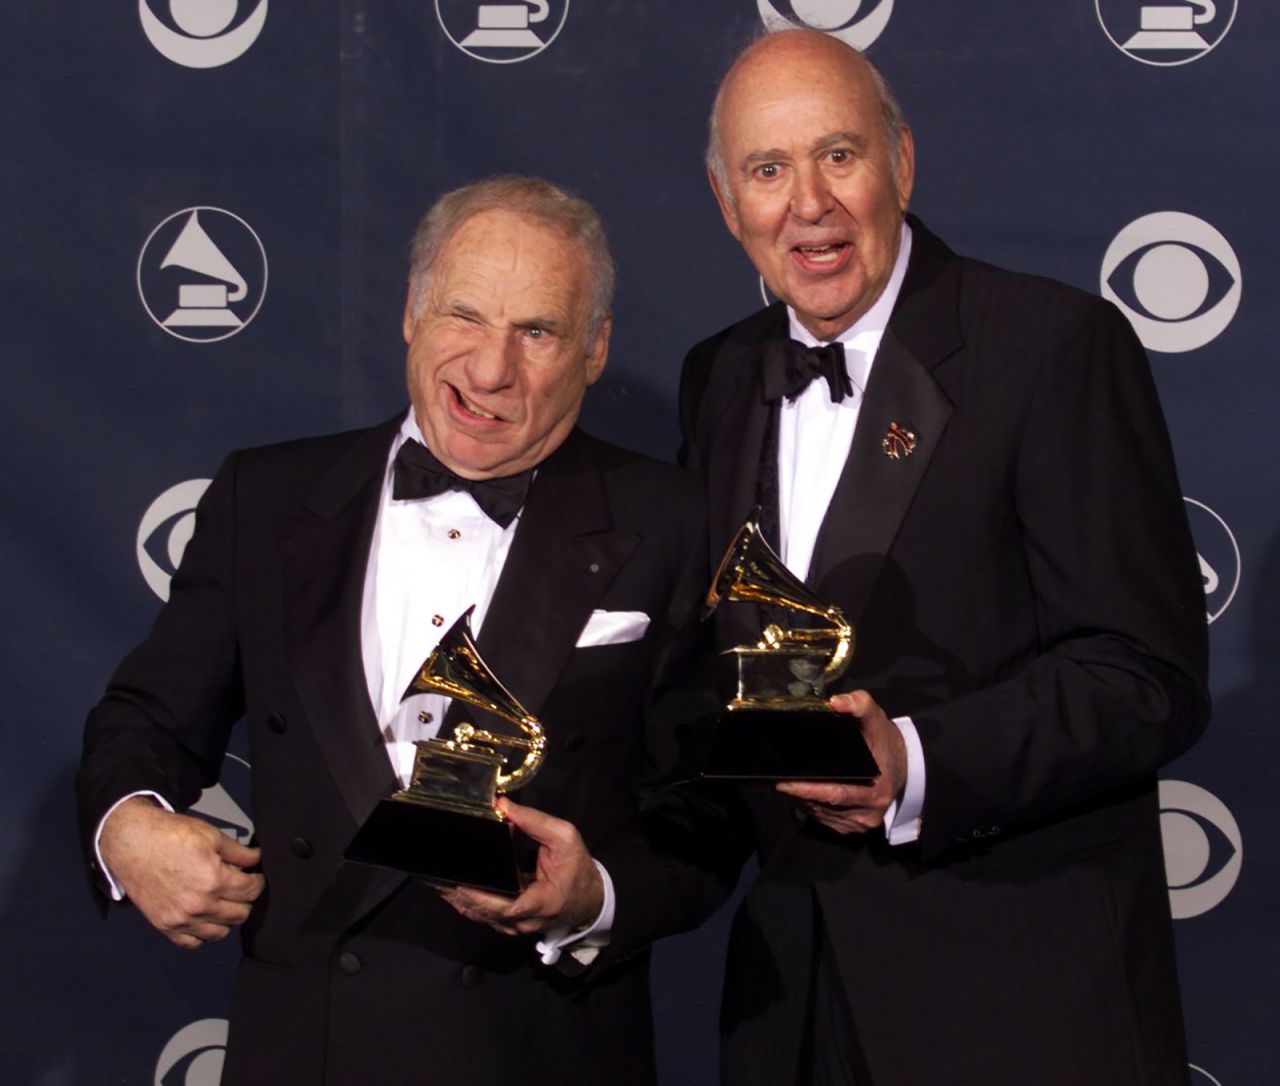 Mel Brooks, left, and Reiner pose with their 1999 Grammy Awards in Los Angeles. They won for "The 2000 Year Old Man in the Year 2000" in the best spoken comedy album category.